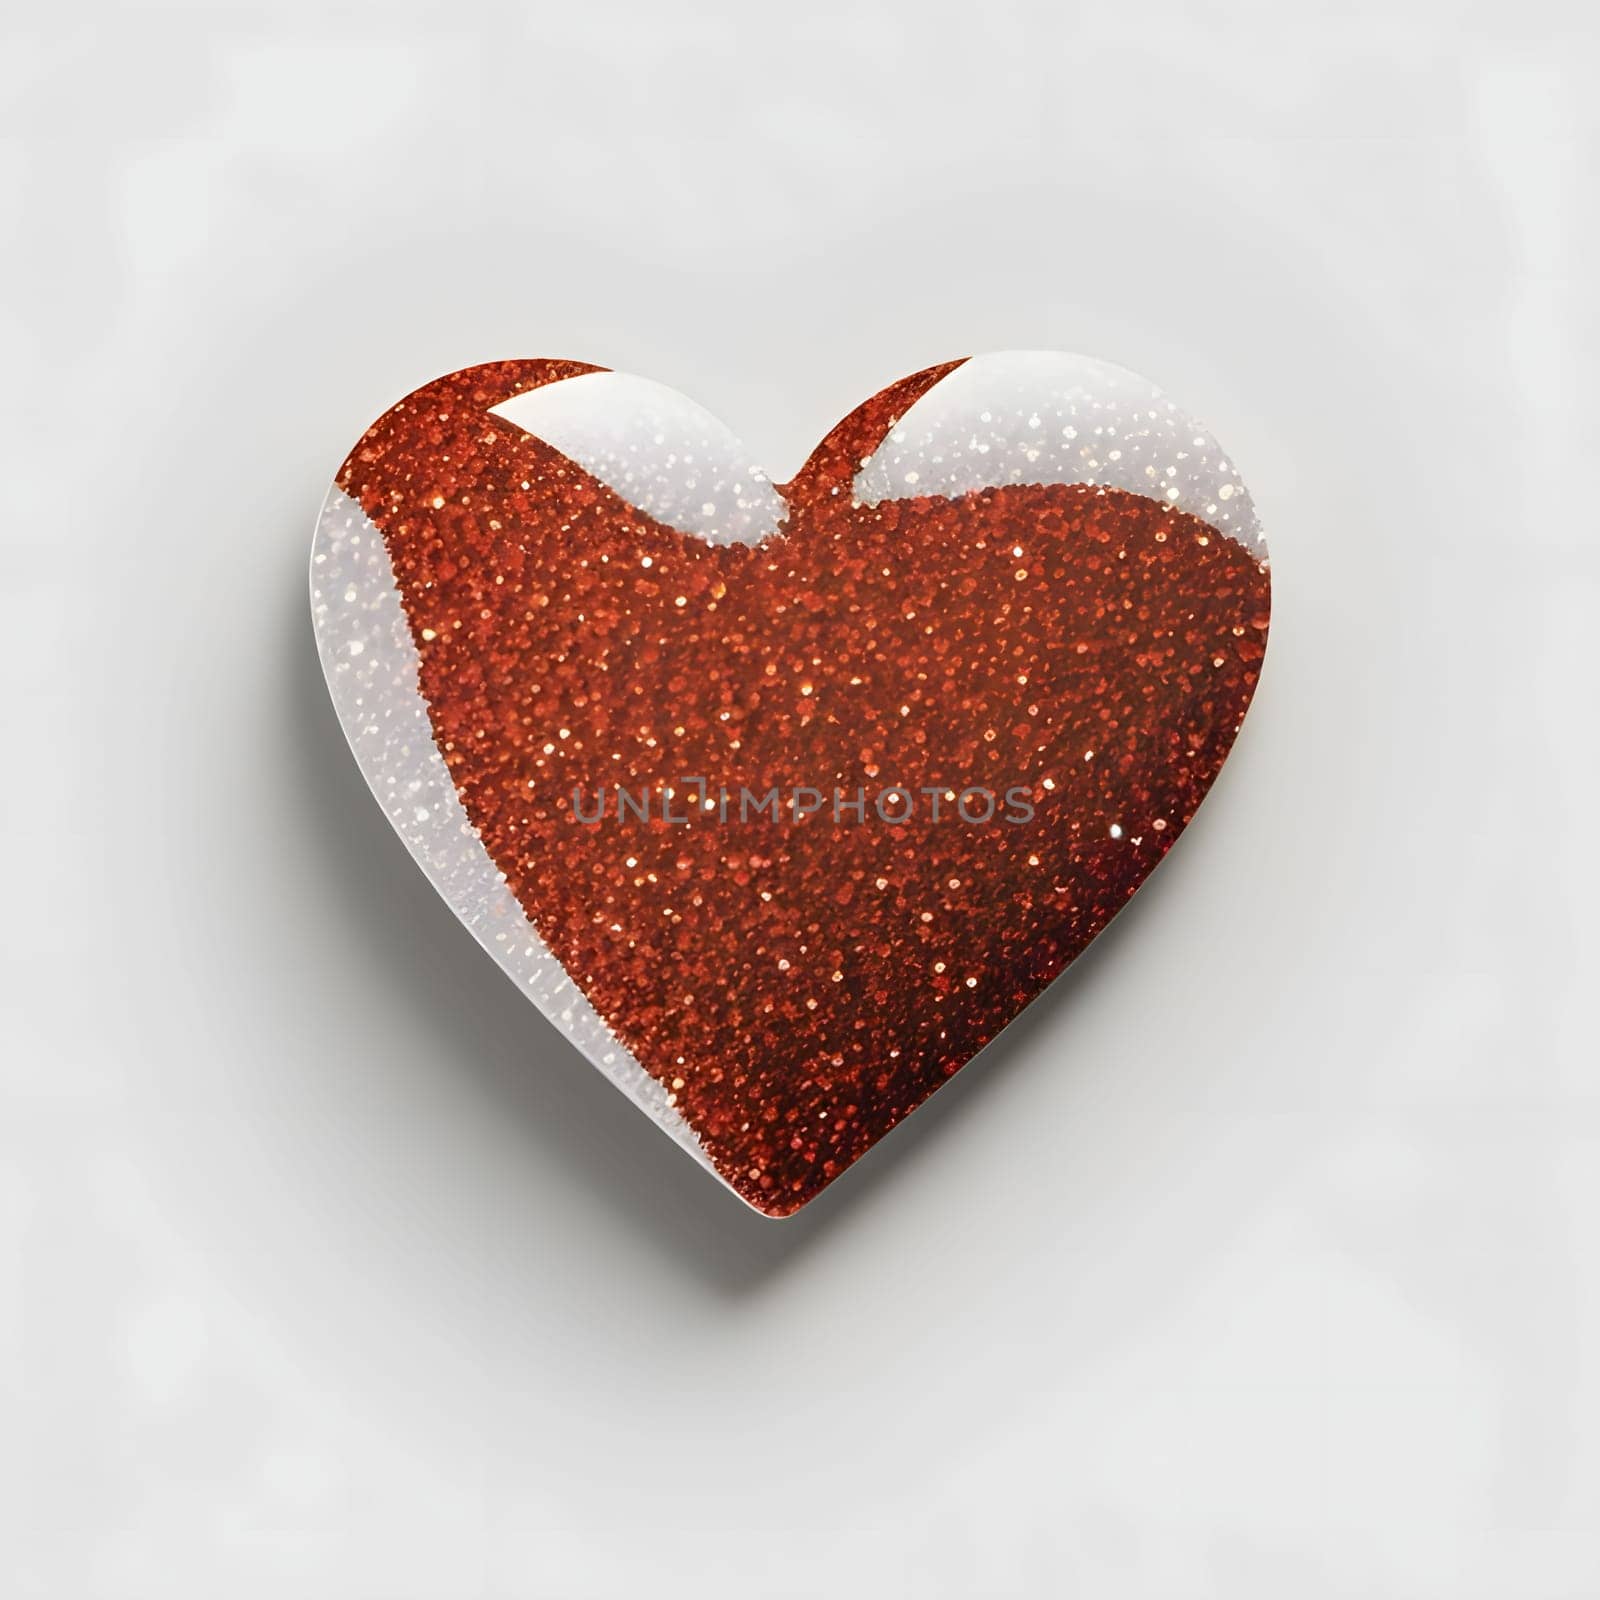 Heart made of millions of tiny rubies with a shiny white isolated background. Heart as a symbol of affection and love. The time of falling in love and love.